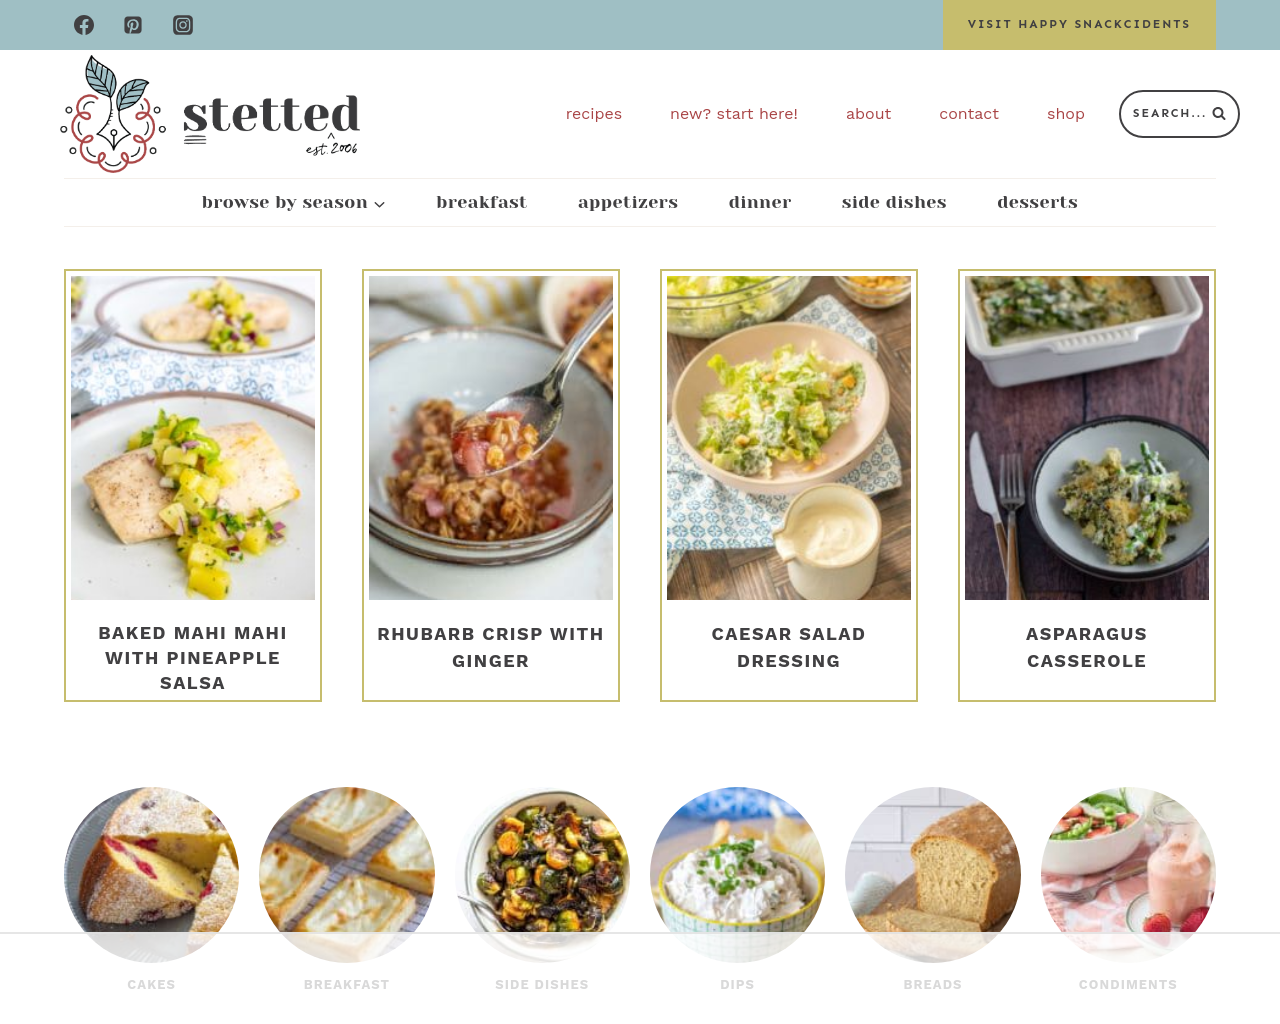 stetted.com